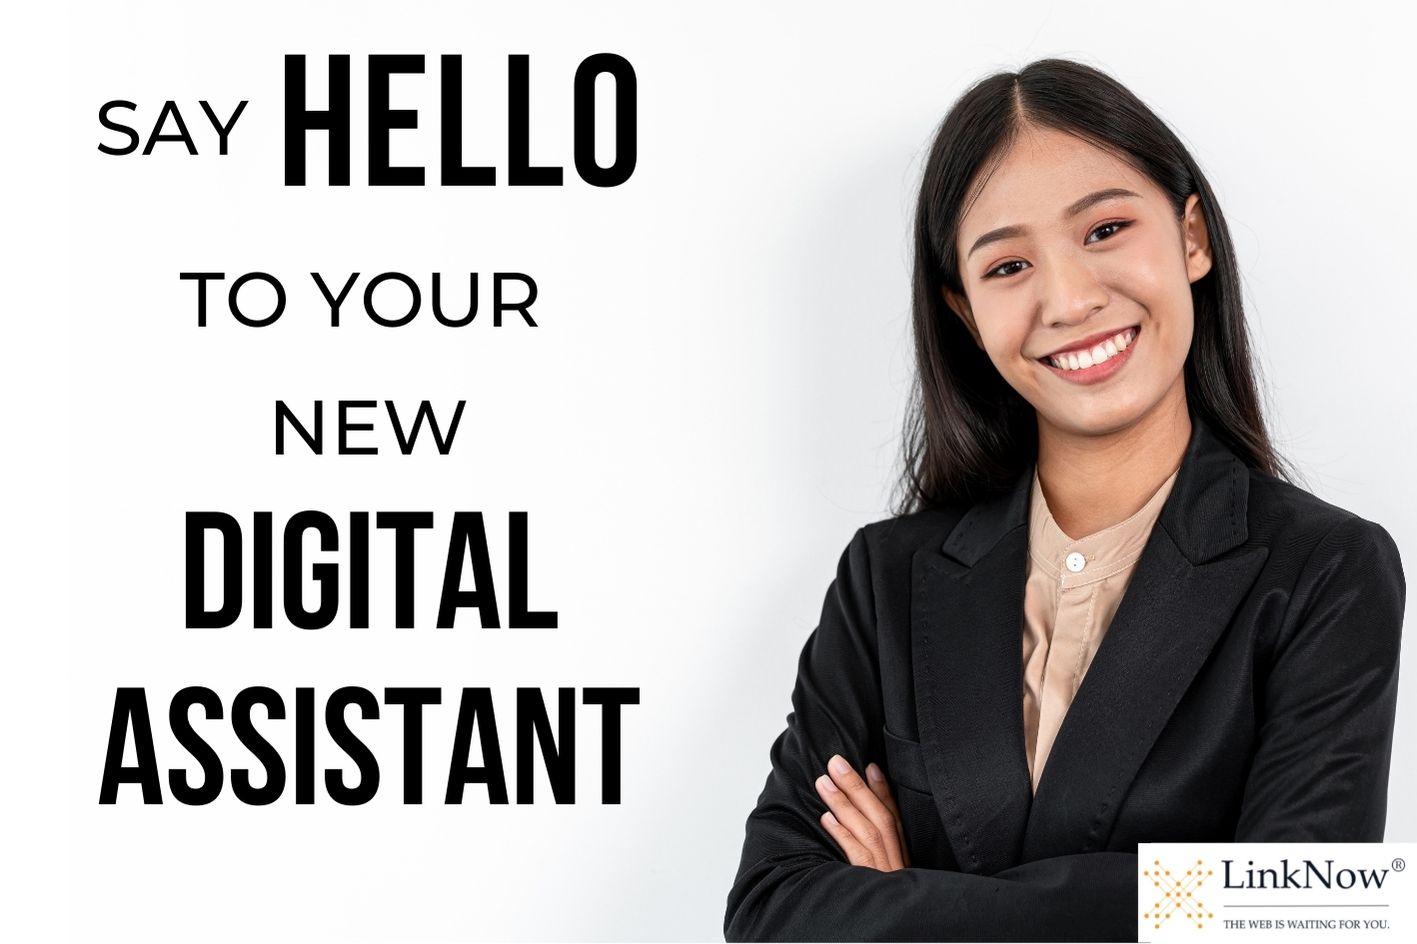 Woman in suit jacket smiling with arms crossed. Text says: Say hello to your new digital assistant.